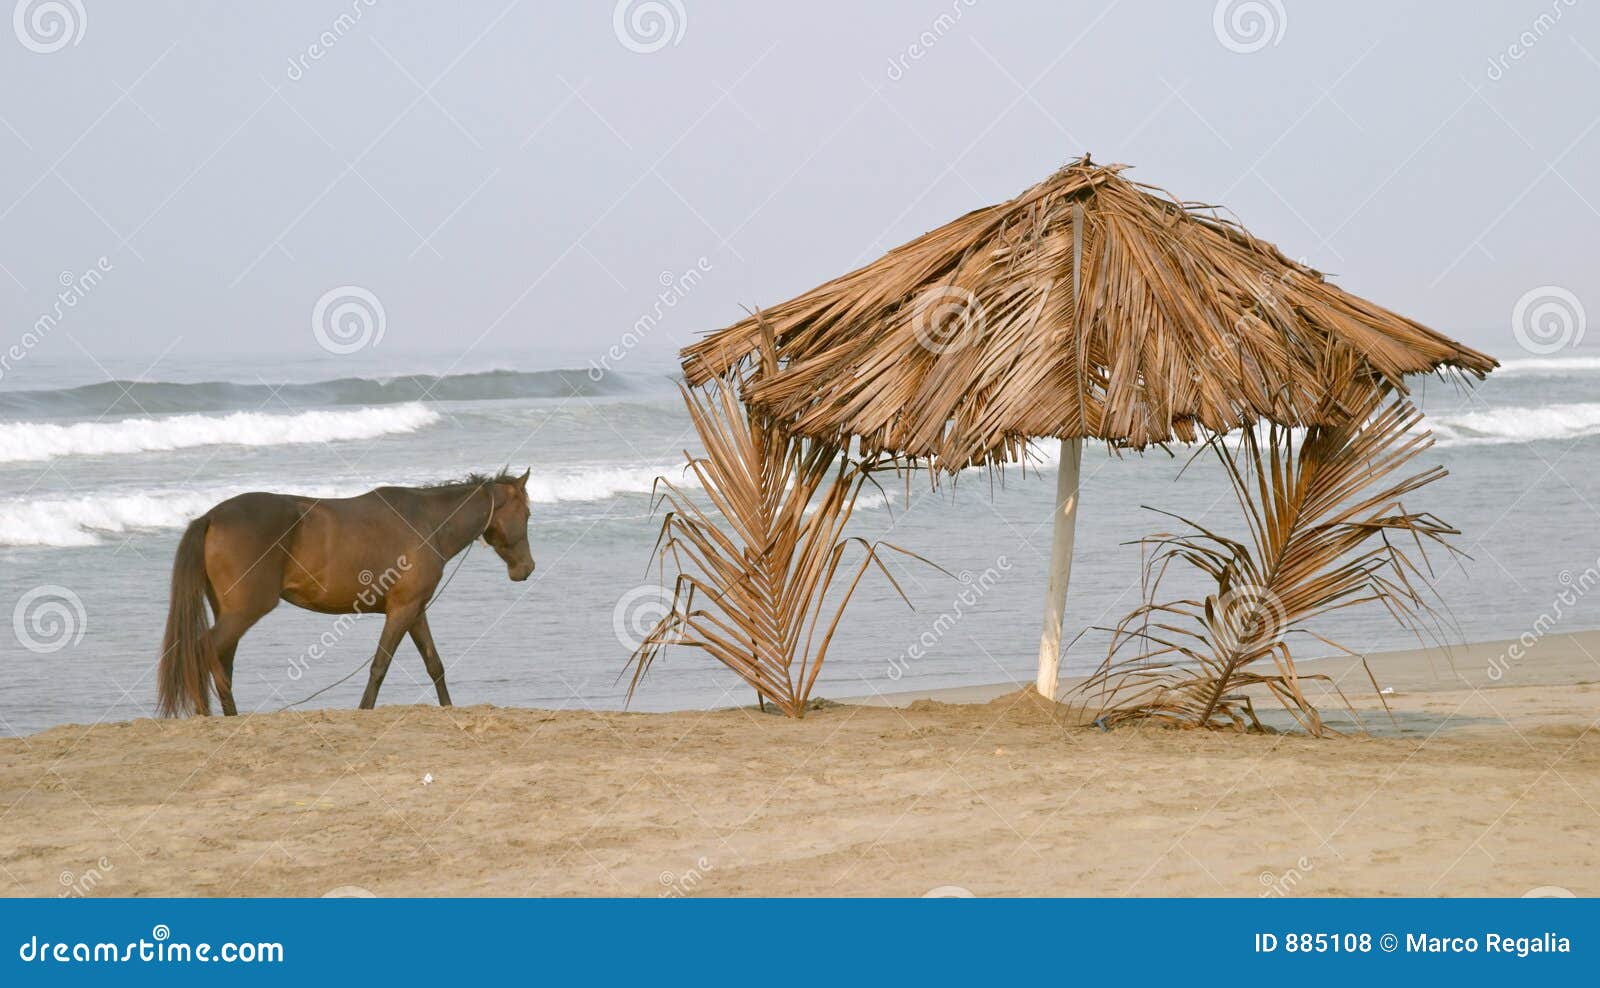 horse and palapa on the beach